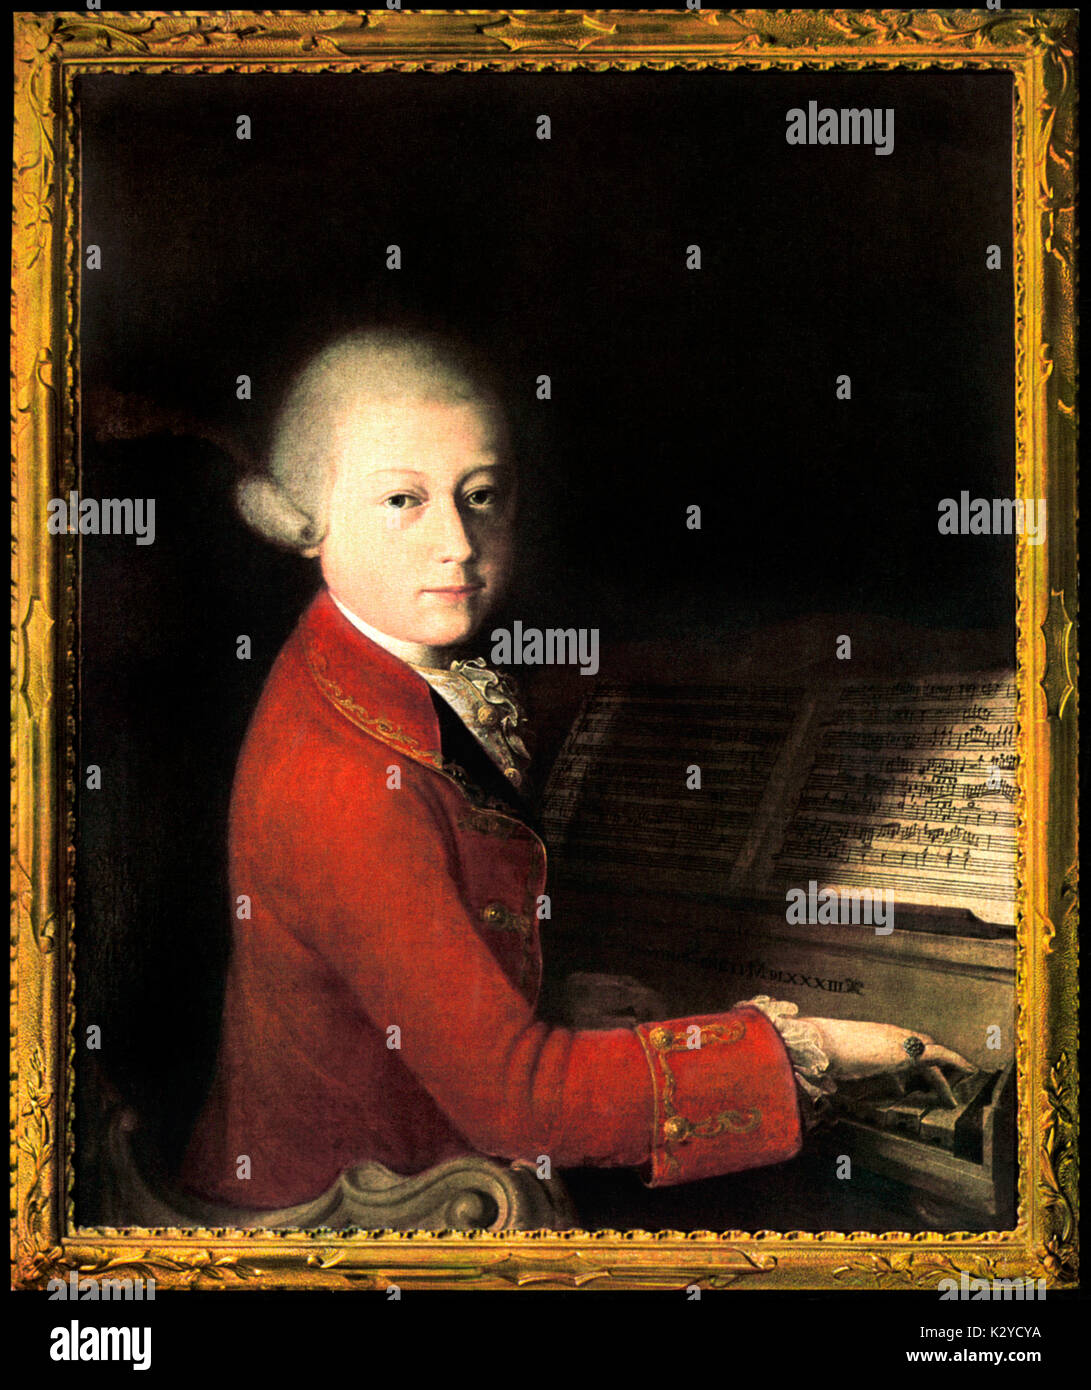 'Wolfgang at Verona' - portrait of Wolfgang Amadeus Mozart at the piano, 1770, aged 14. Painting by  Portrait of 14 year old Mozart.  Portrait by Giuseppe Cignaroli (1726-1796 Italian artist).   Austrian composer, 27 January 1756 - 5 December 1791. Stock Photo